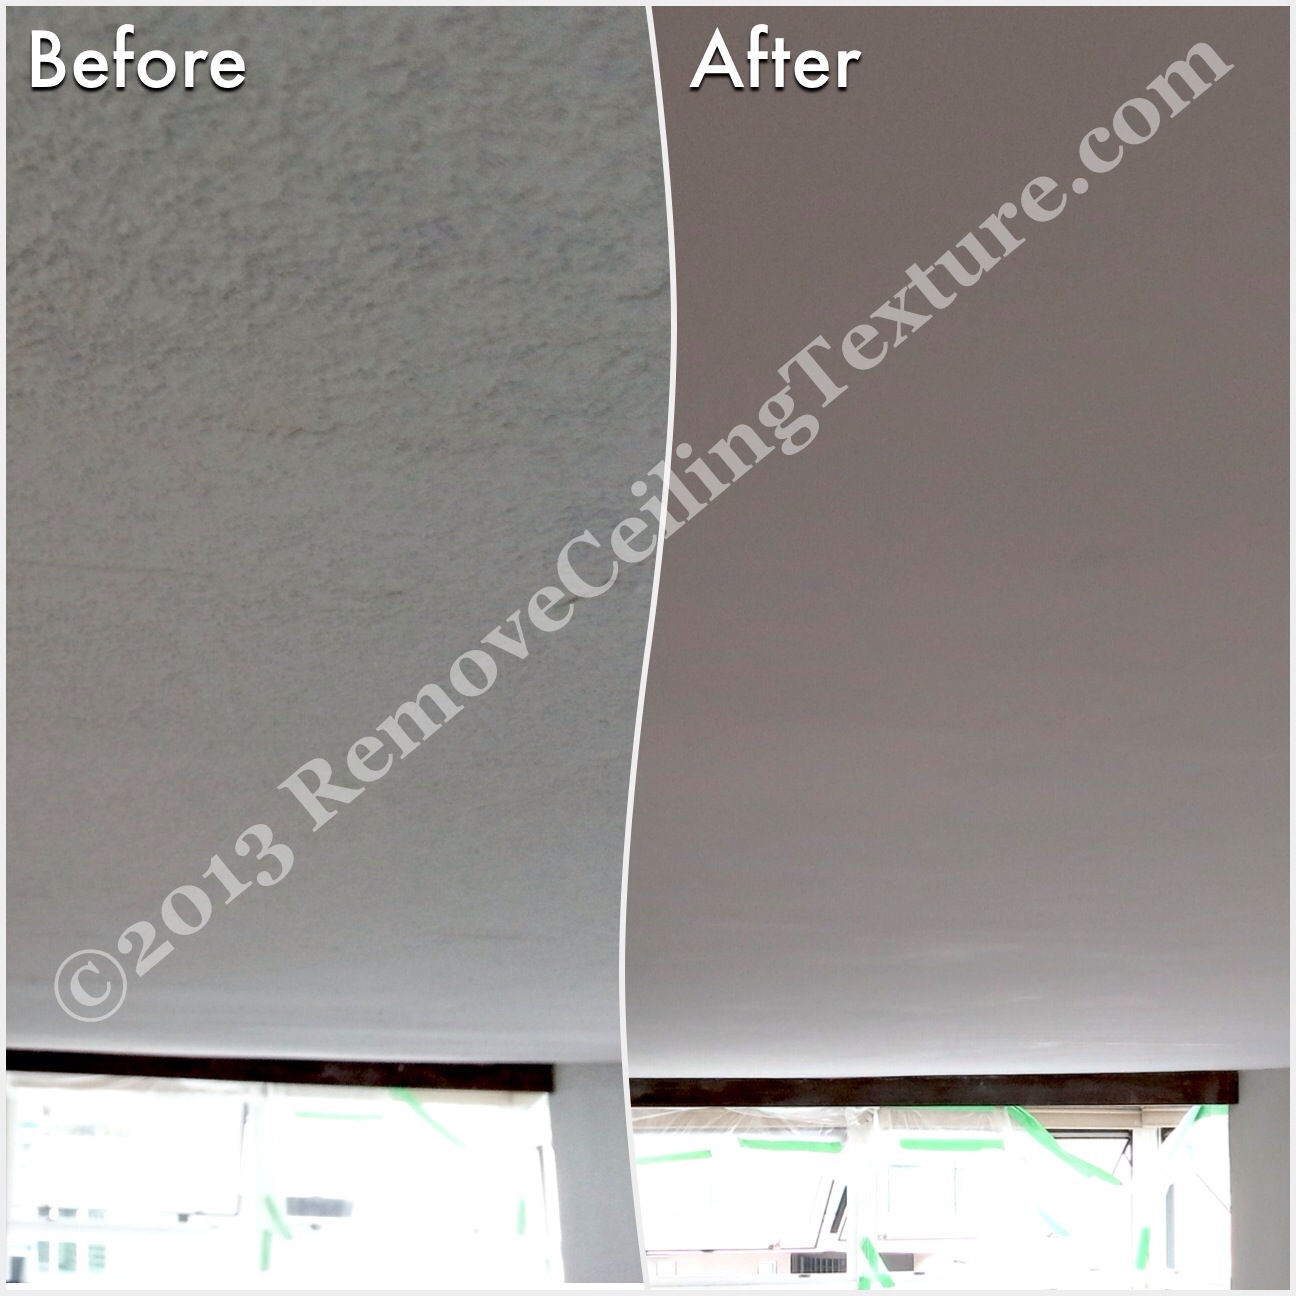 The before photo is after the homeowner tried scraping texture from ceilings. In the end he ended up calling RemoveCeilingTexture.com to fix the mess.